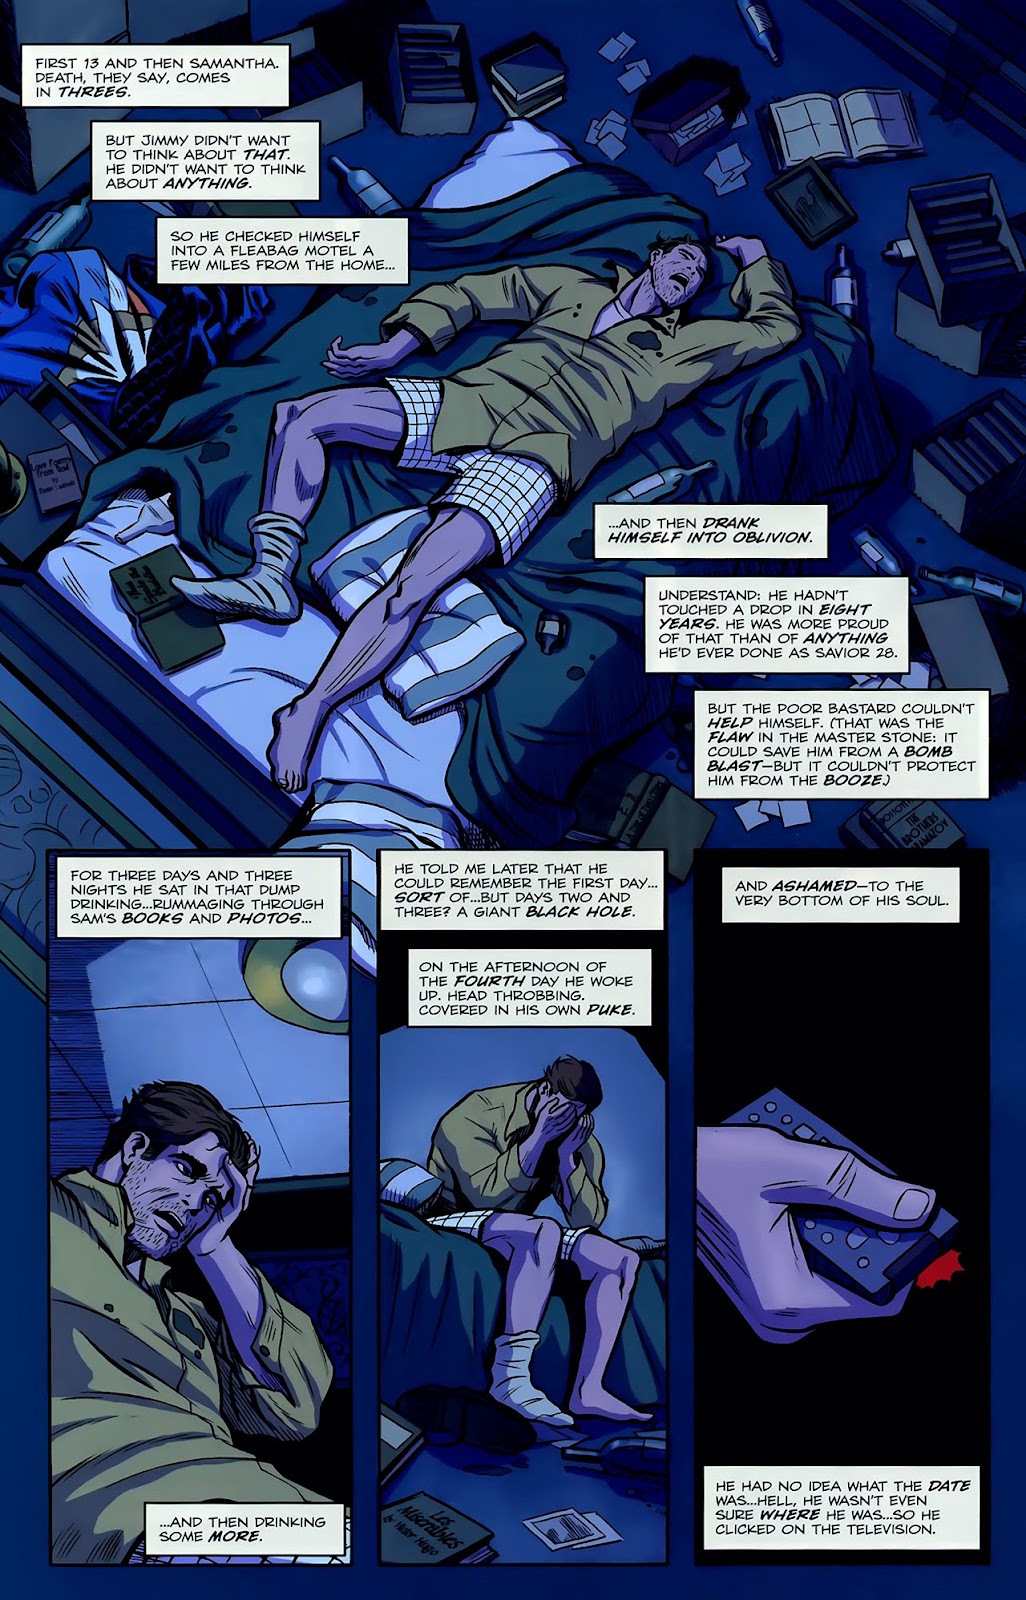 The Life and Times of Savior 28 issue 1 - Page 20